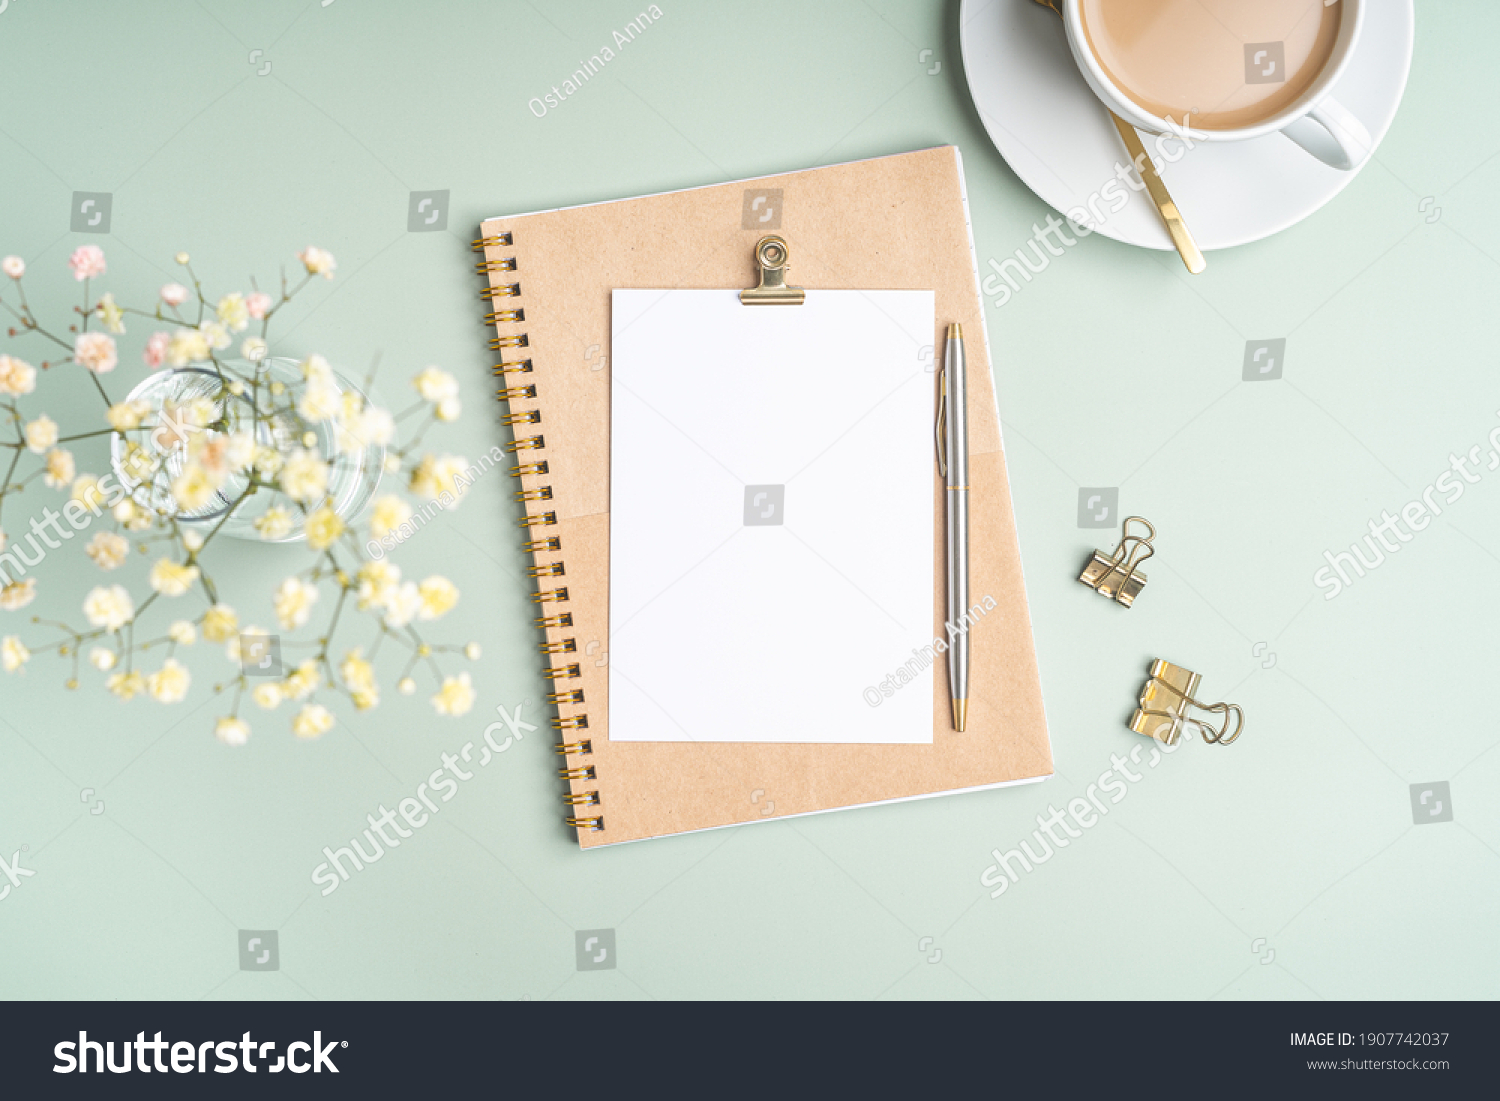 Top view blank paper Notebook, flowers, golden paper binder clips, cup of coffee and pen. Desktop mock up, Flat lay of green working table background with office equipment, mockup greeting card #1907742037